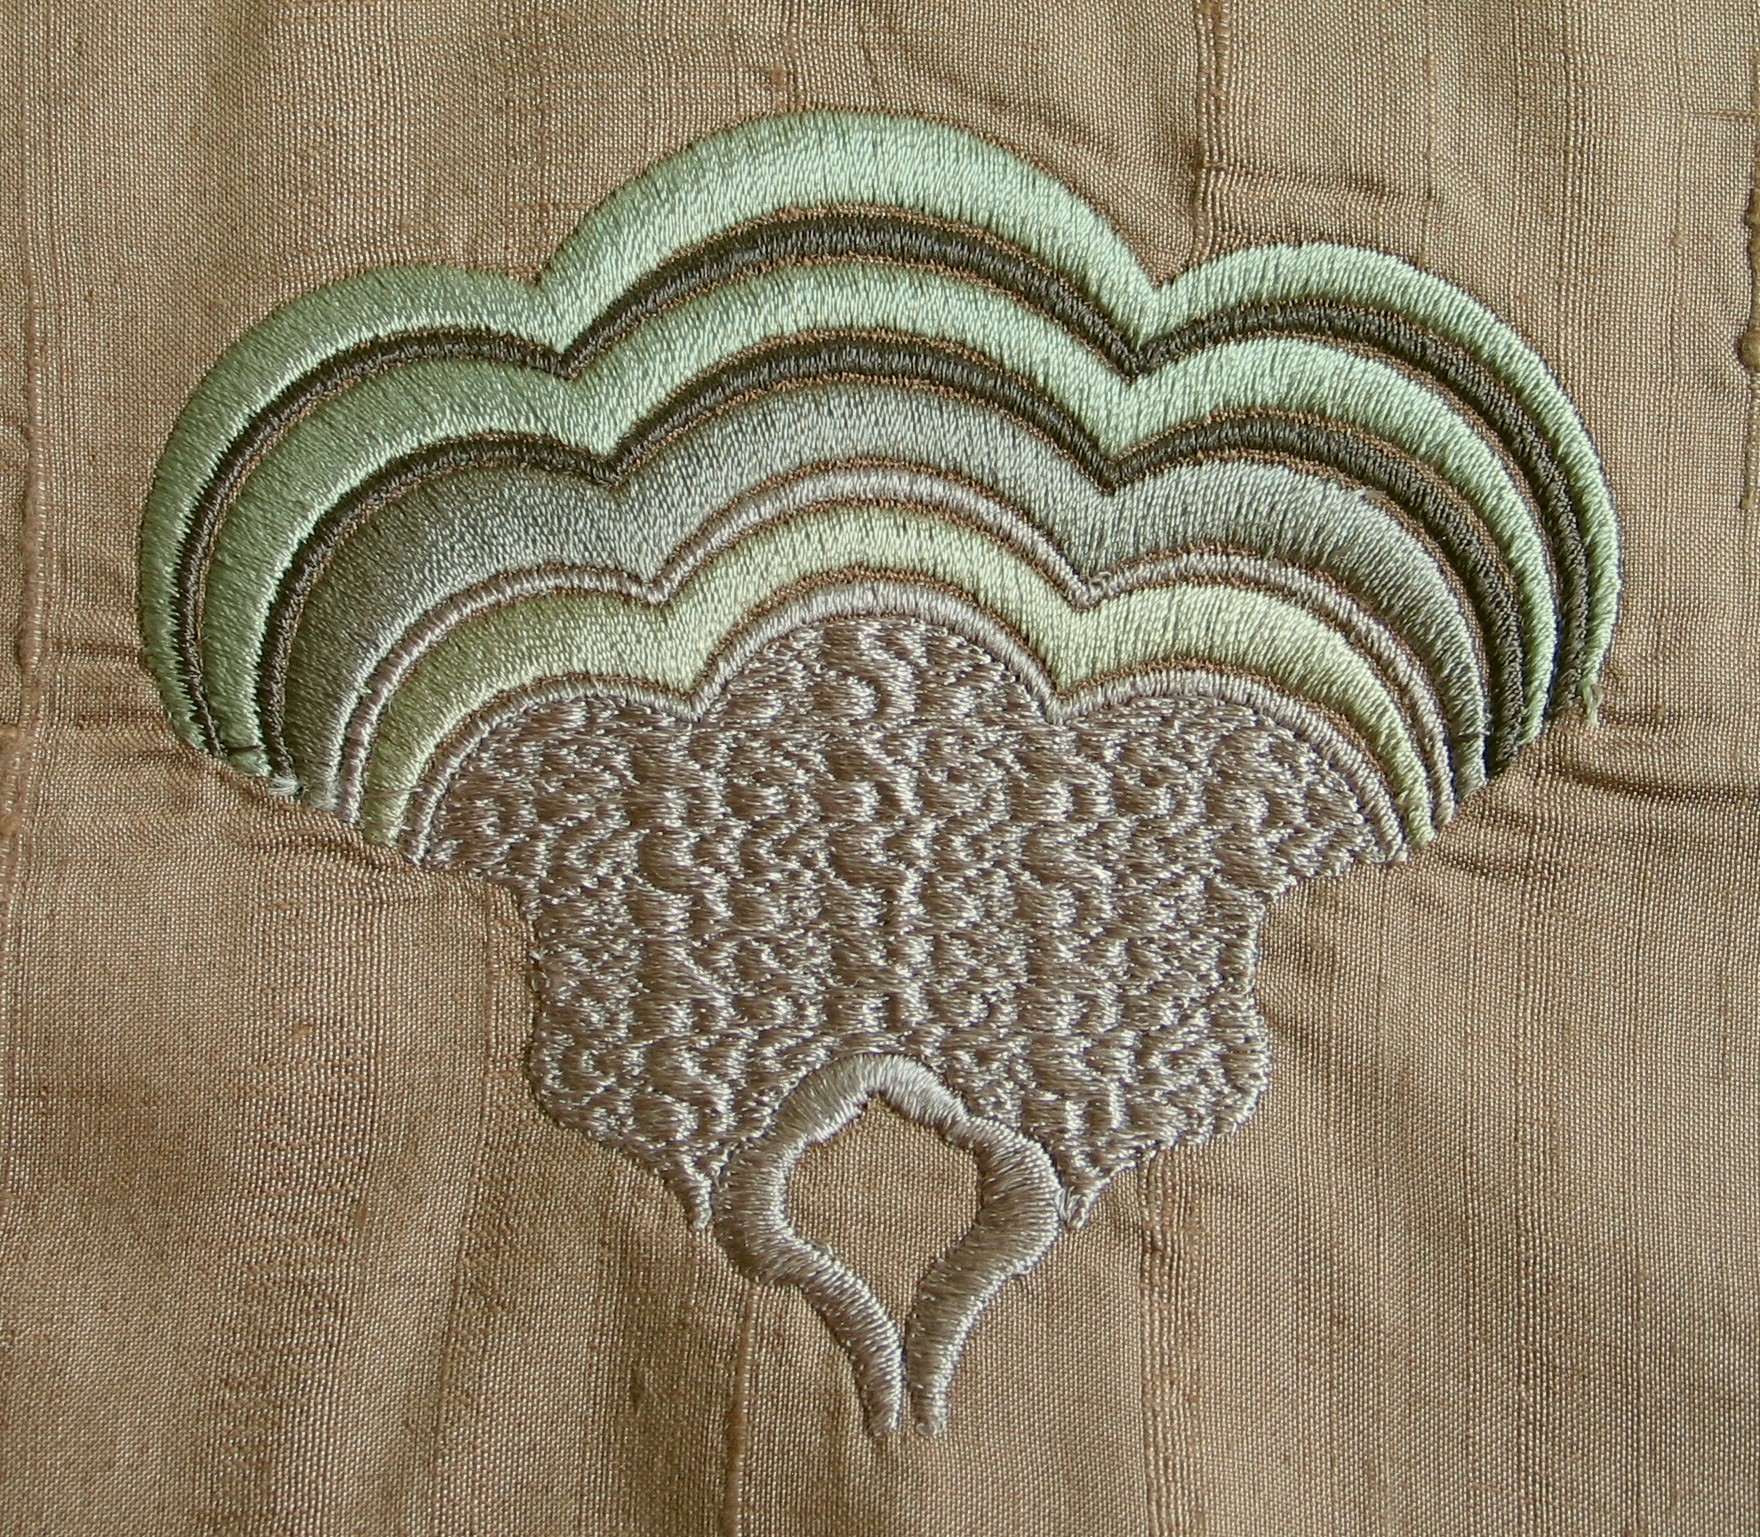 satin-stitch-ornament-abstract-embroidery